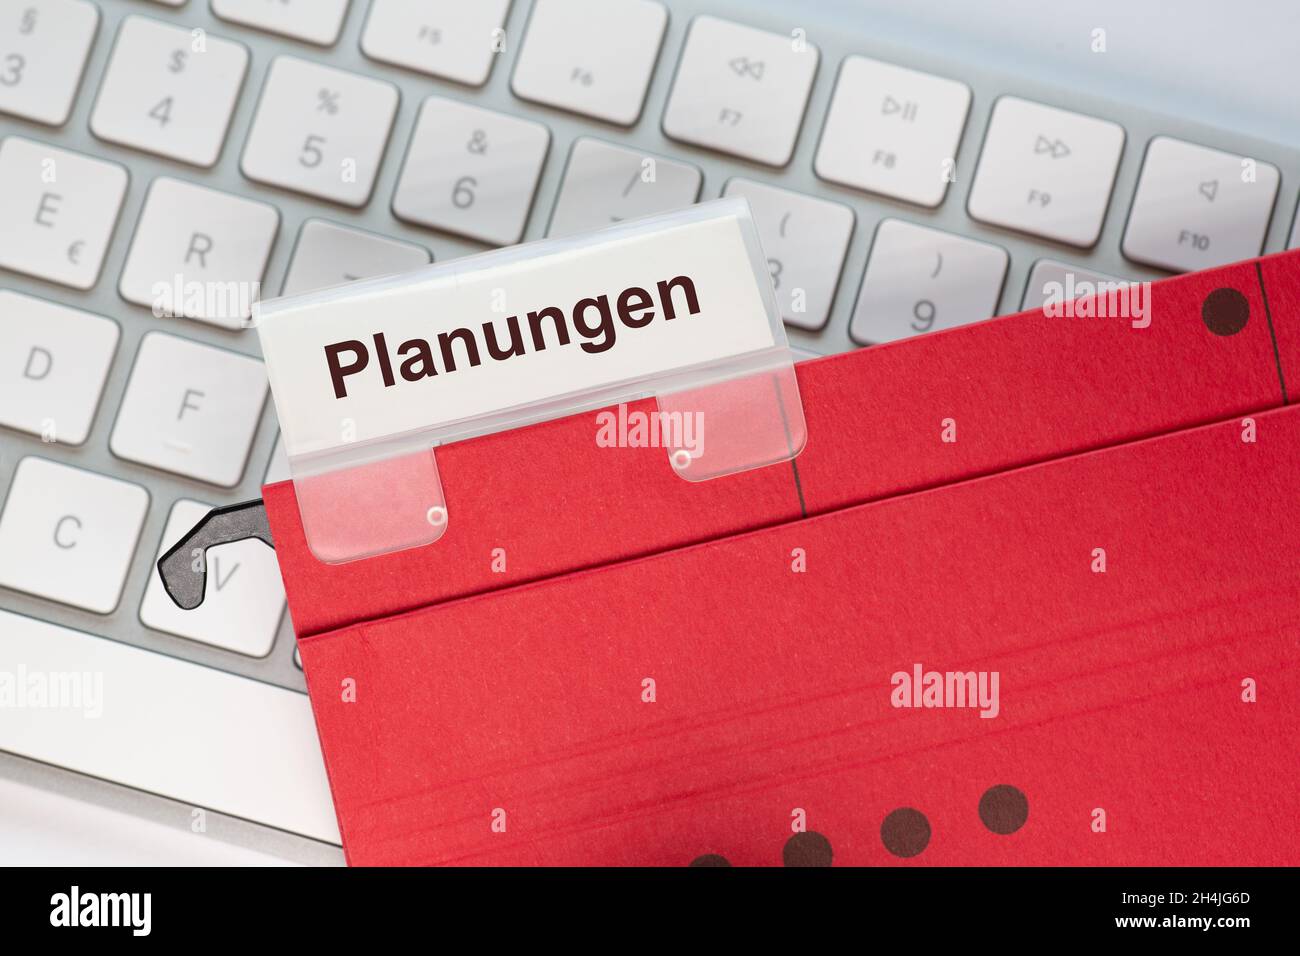 The German word for Planning can be seen on the label of a red hanging folder. The hanging folder is on a computer keyboard. Stock Photo